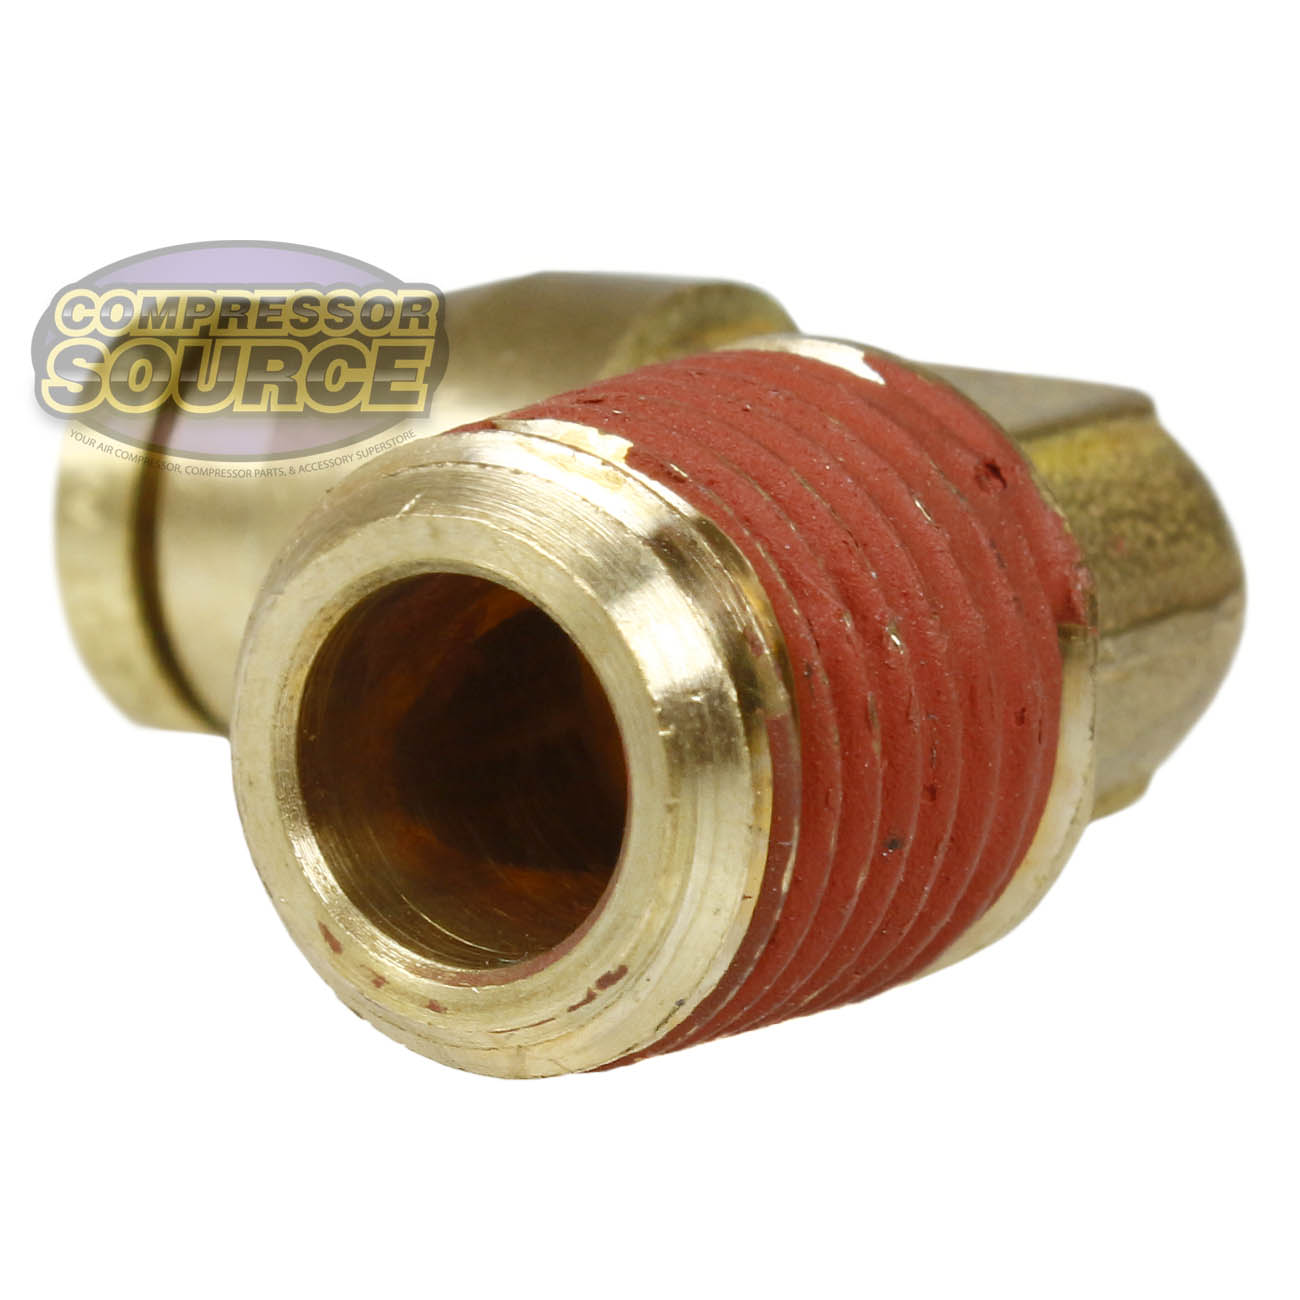 10 Pack 1/4" x 1/4" Push-In x Male NPTF Fixed Elbow Brass Quick Connect Fitting